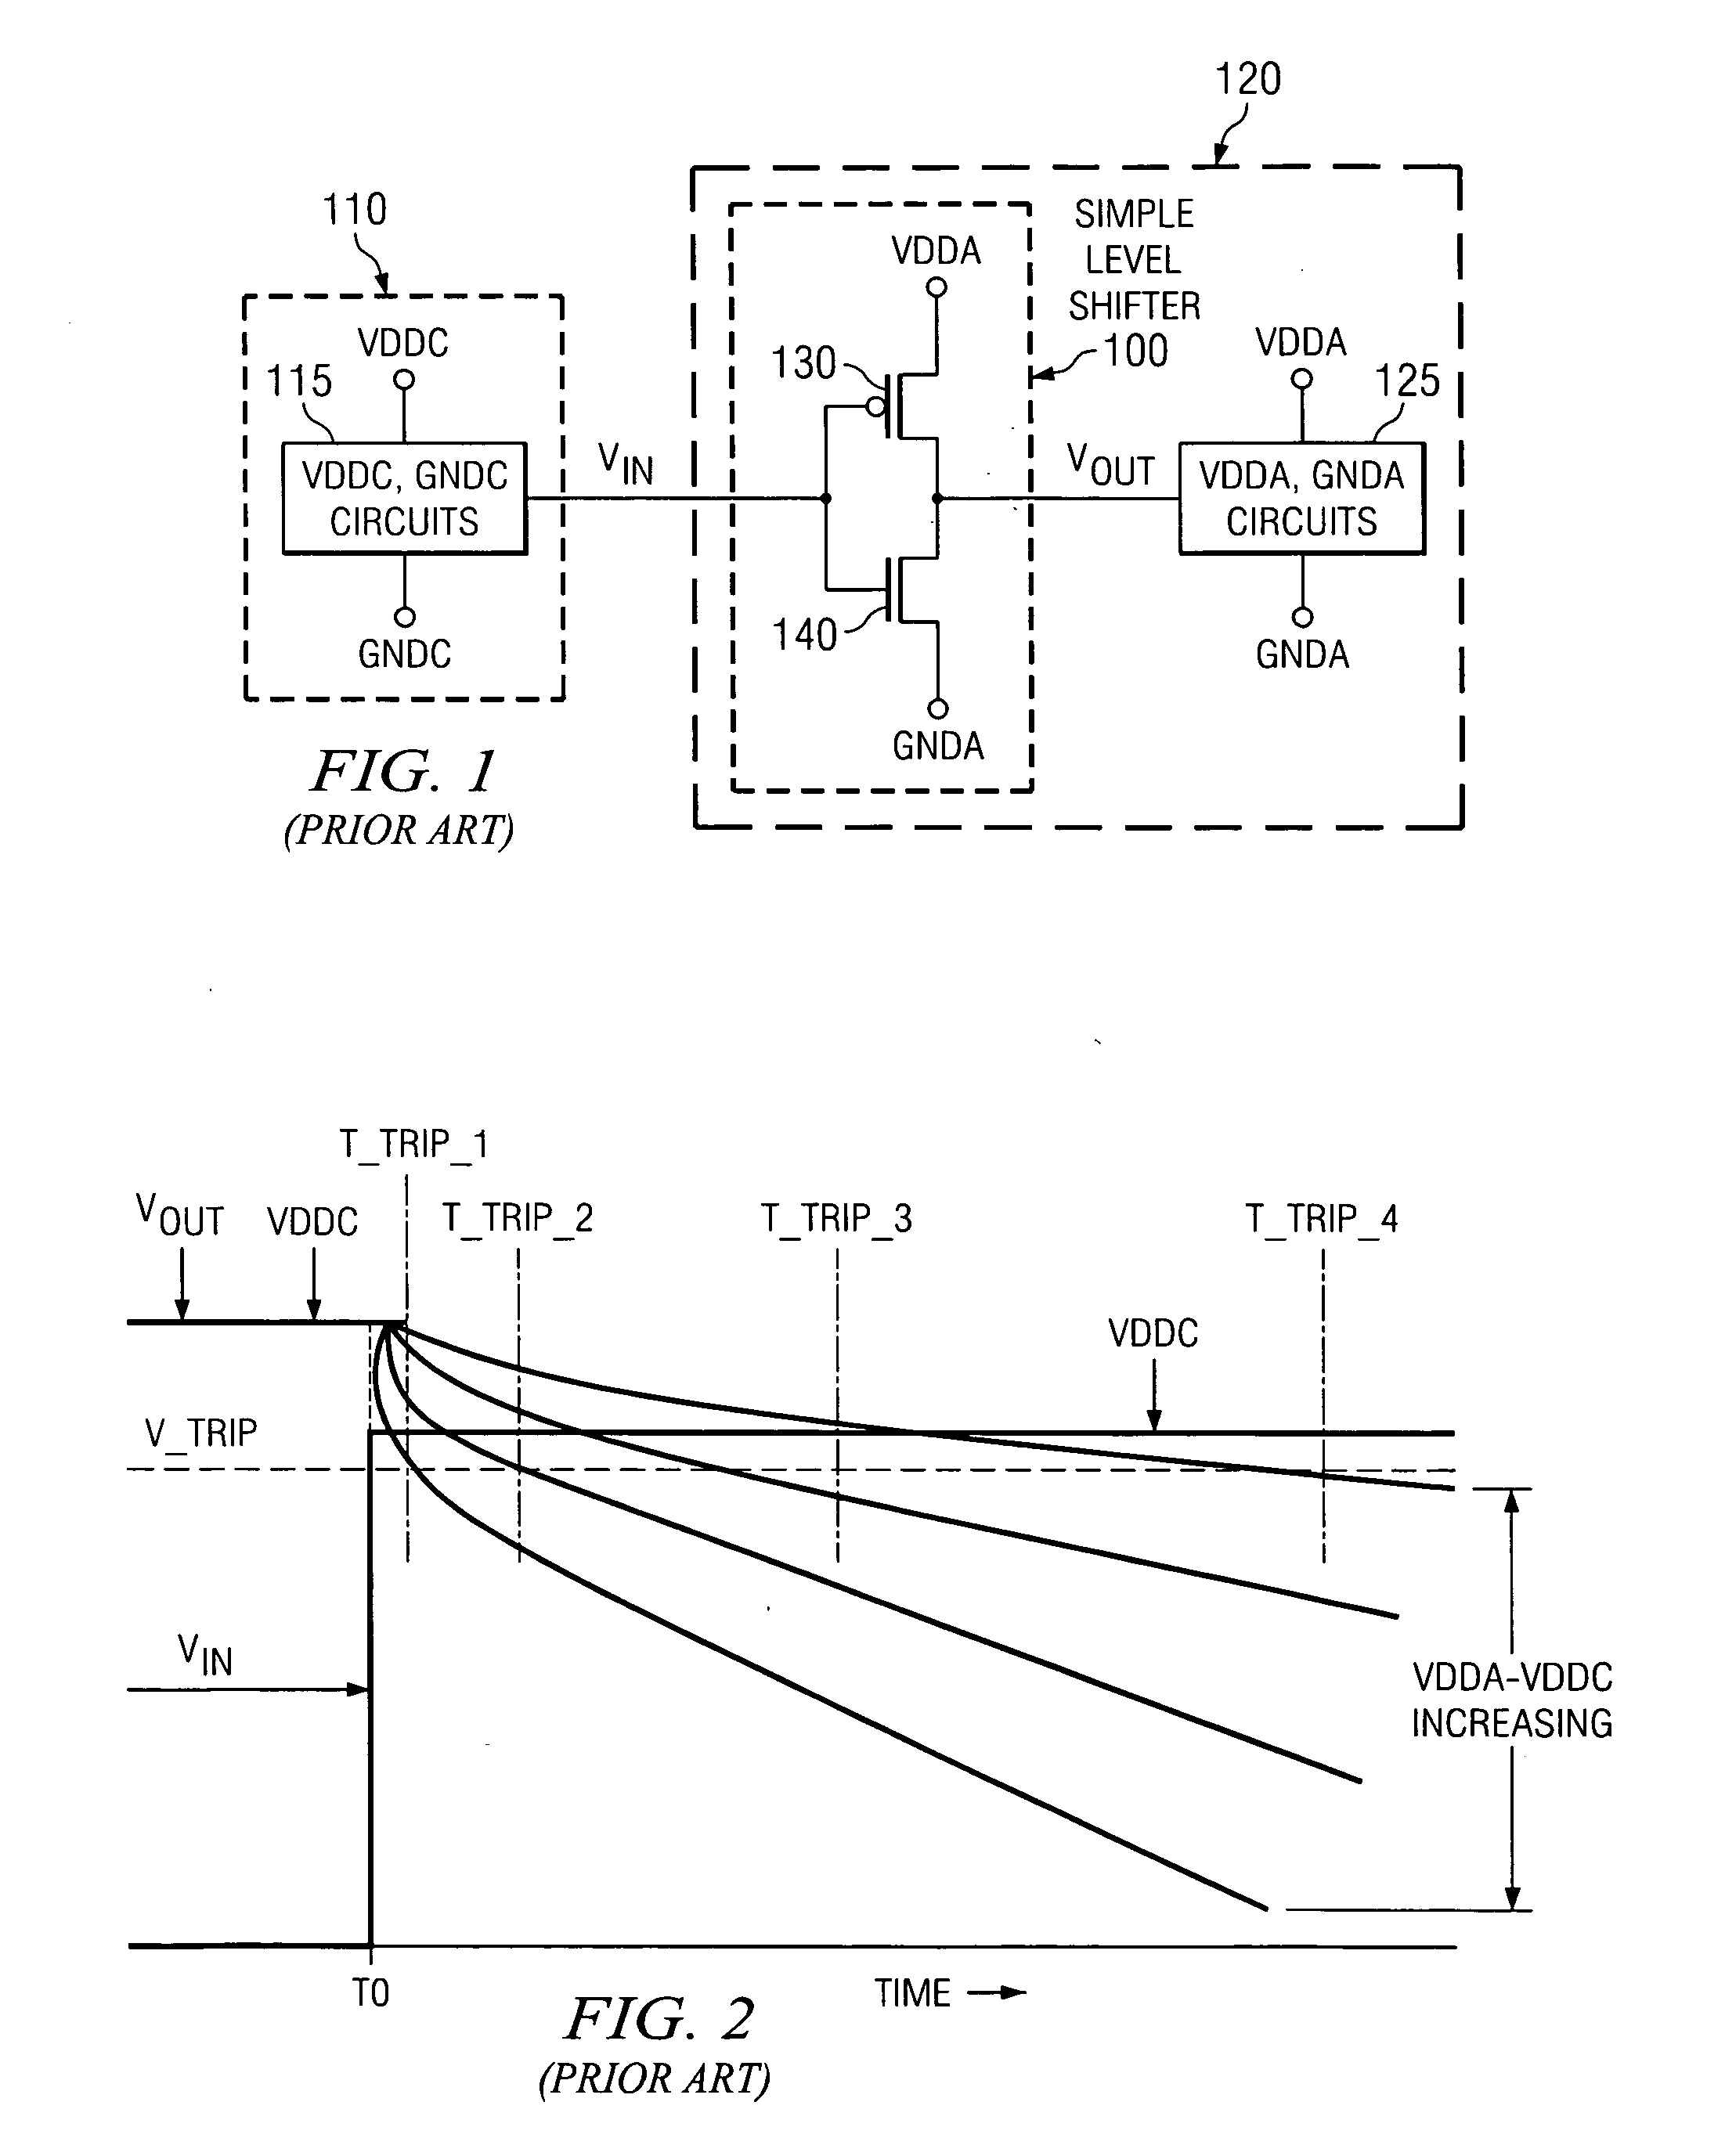 Level shifter apparatus and method for minimizing duty cycle distortion